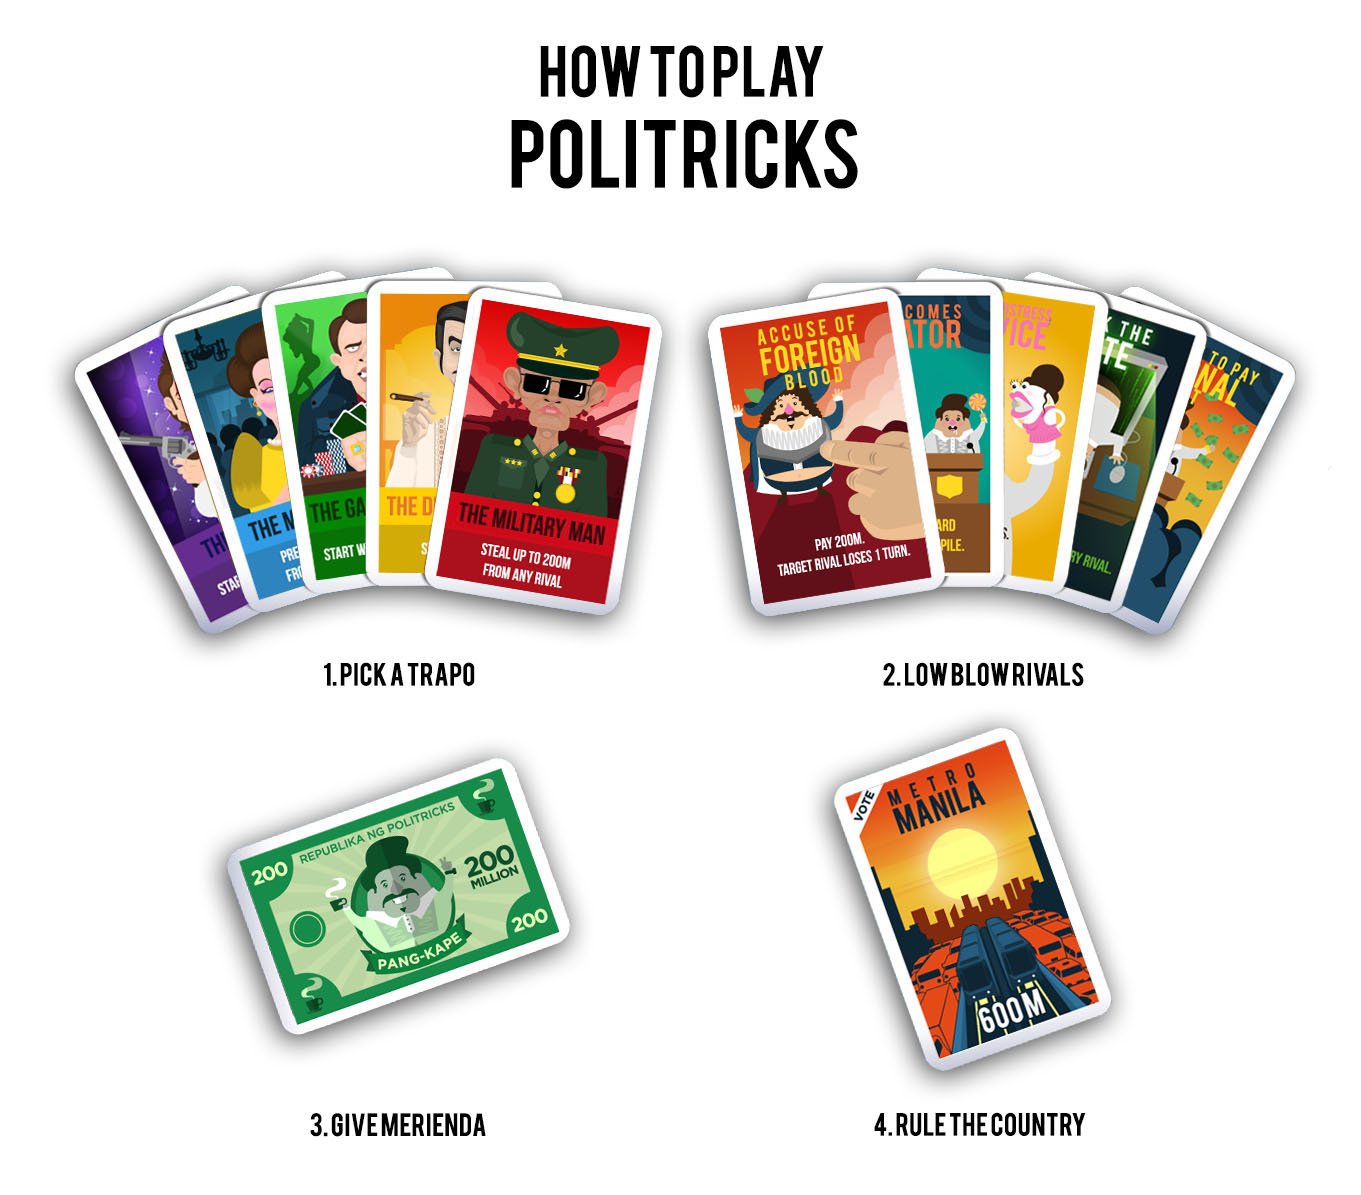 Be Like a Trapo with the Politricks Card Game